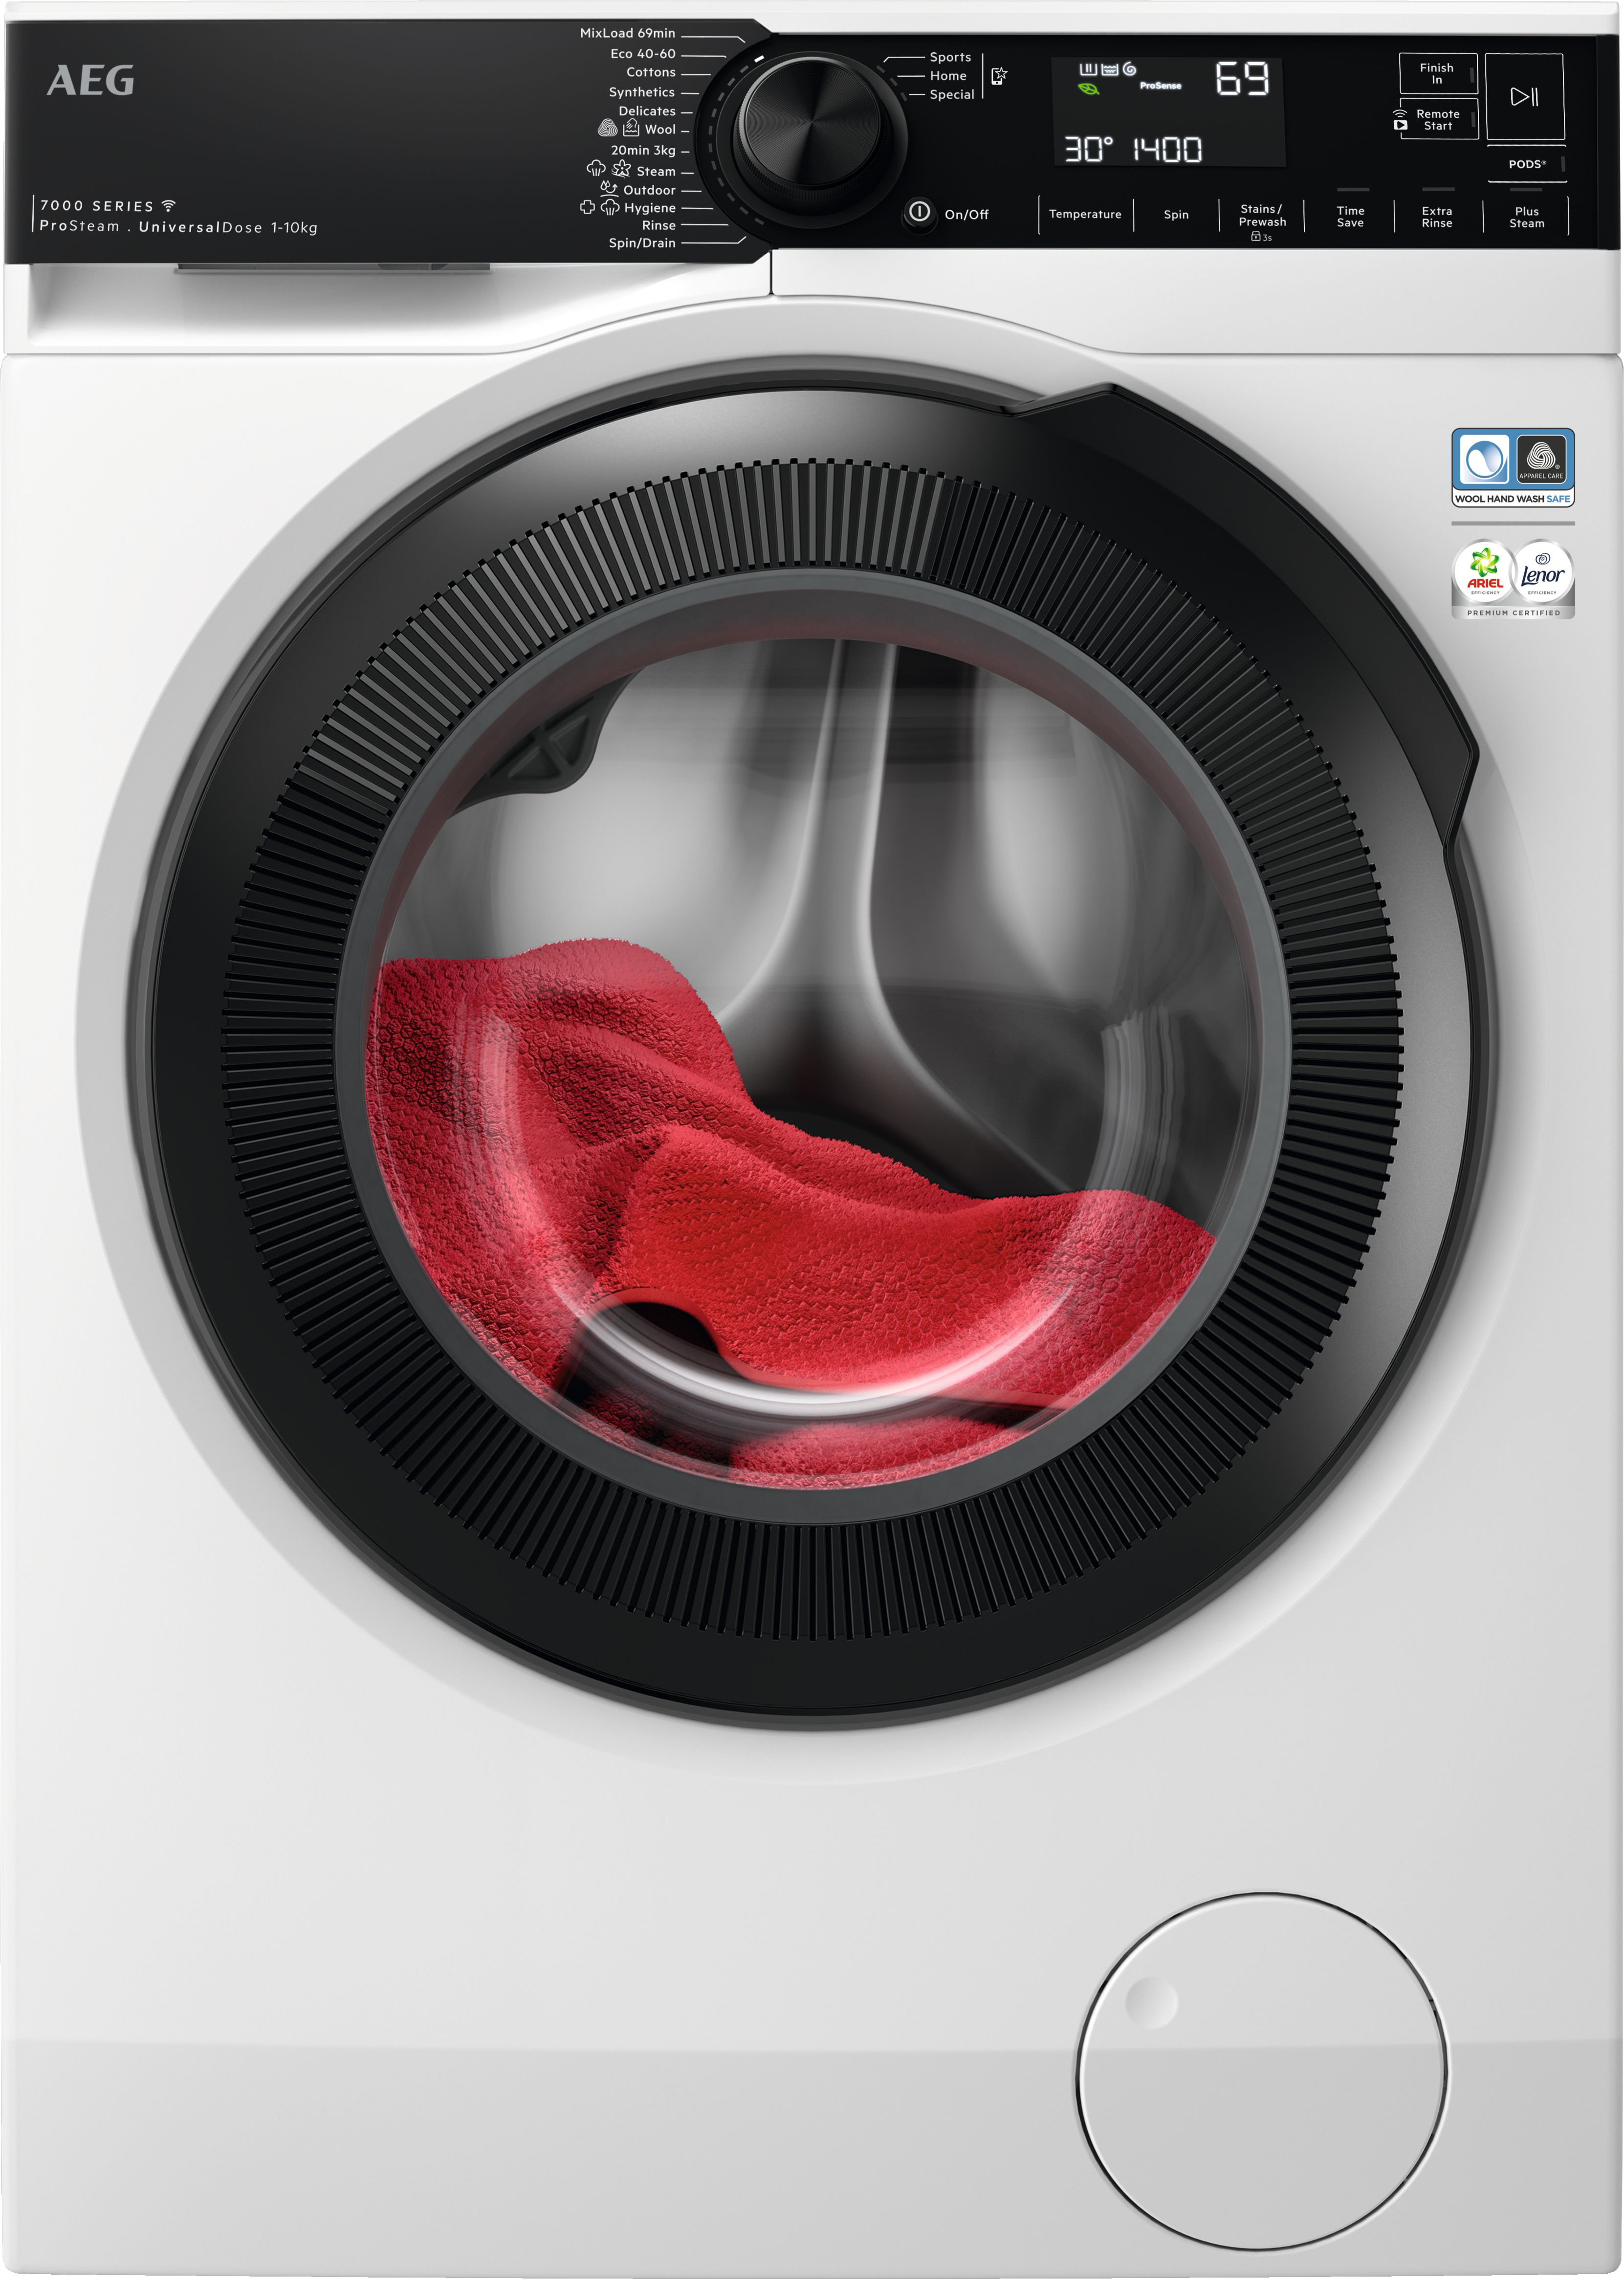 AEG LFR74164UC 10kg Washing Machine with 1600 rpm - White - A Rated, White